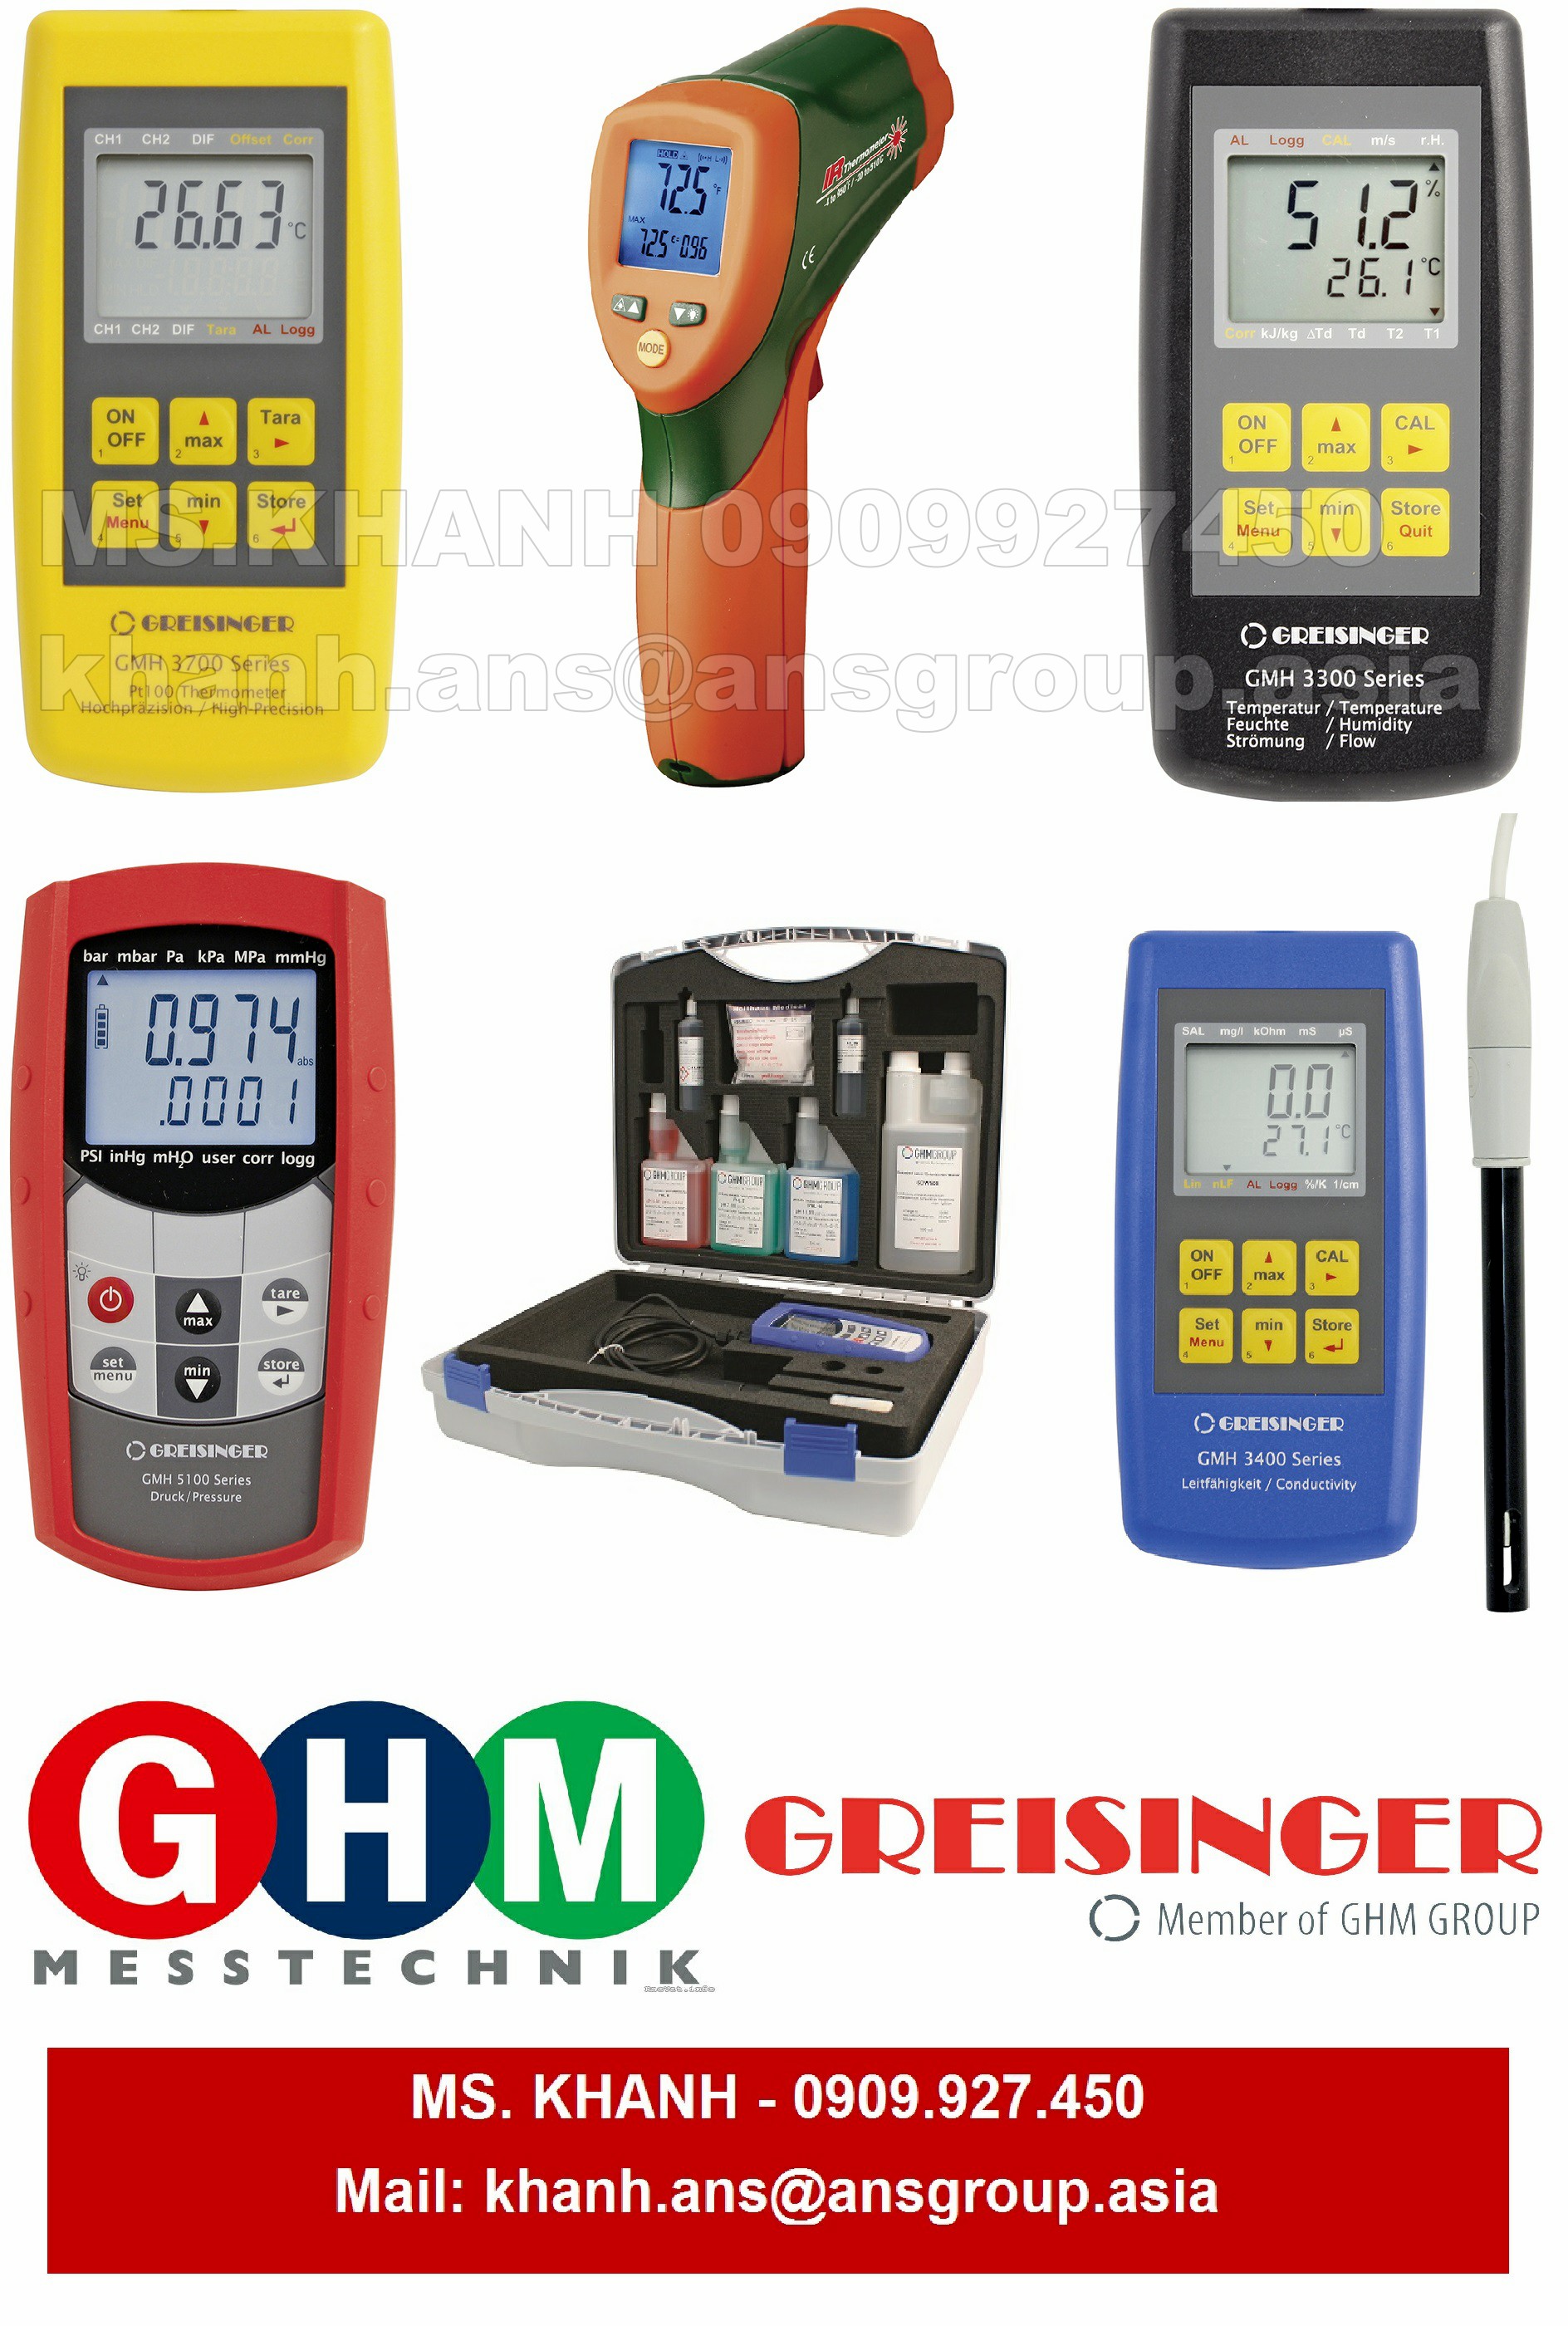 thiet-bi-do-do-am-trong-go-gmk100-measuring-device-for-moisture-in-wood-and-buildings-greisinger-ghm-vietnam.png